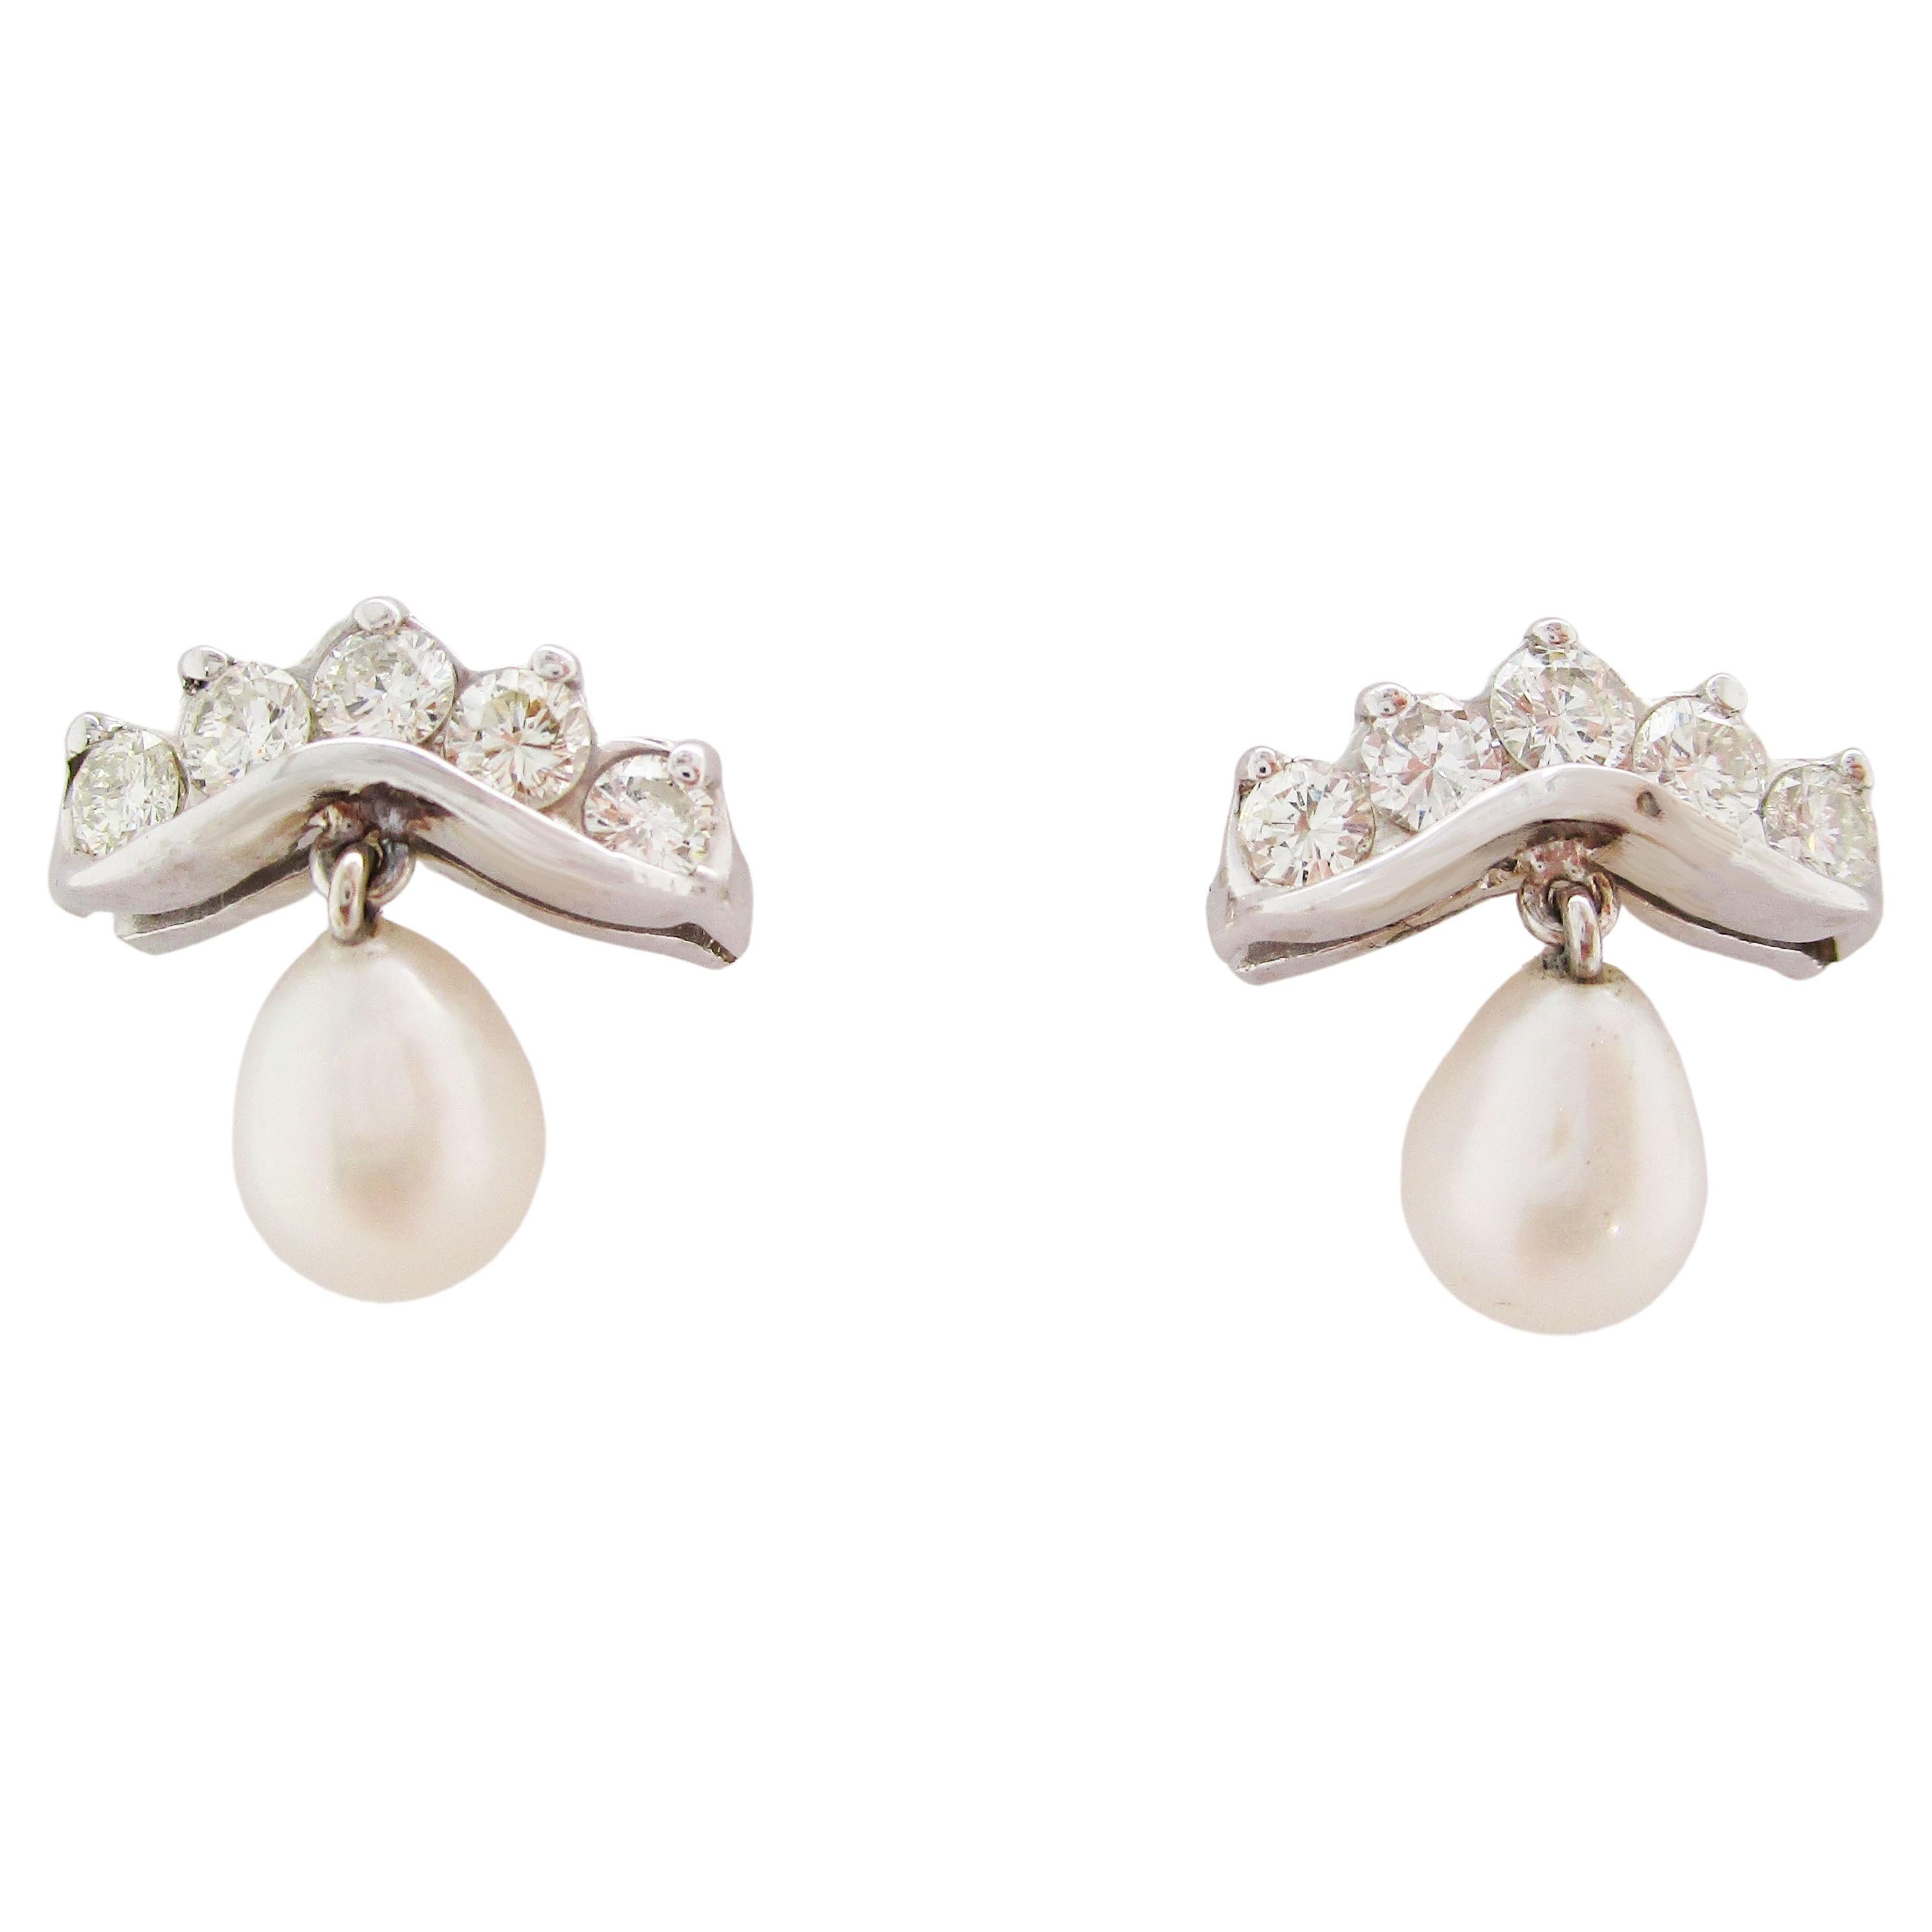 Contemporary 14K White Gold Diamond and Akoya Pearl Crown Drop Earrings